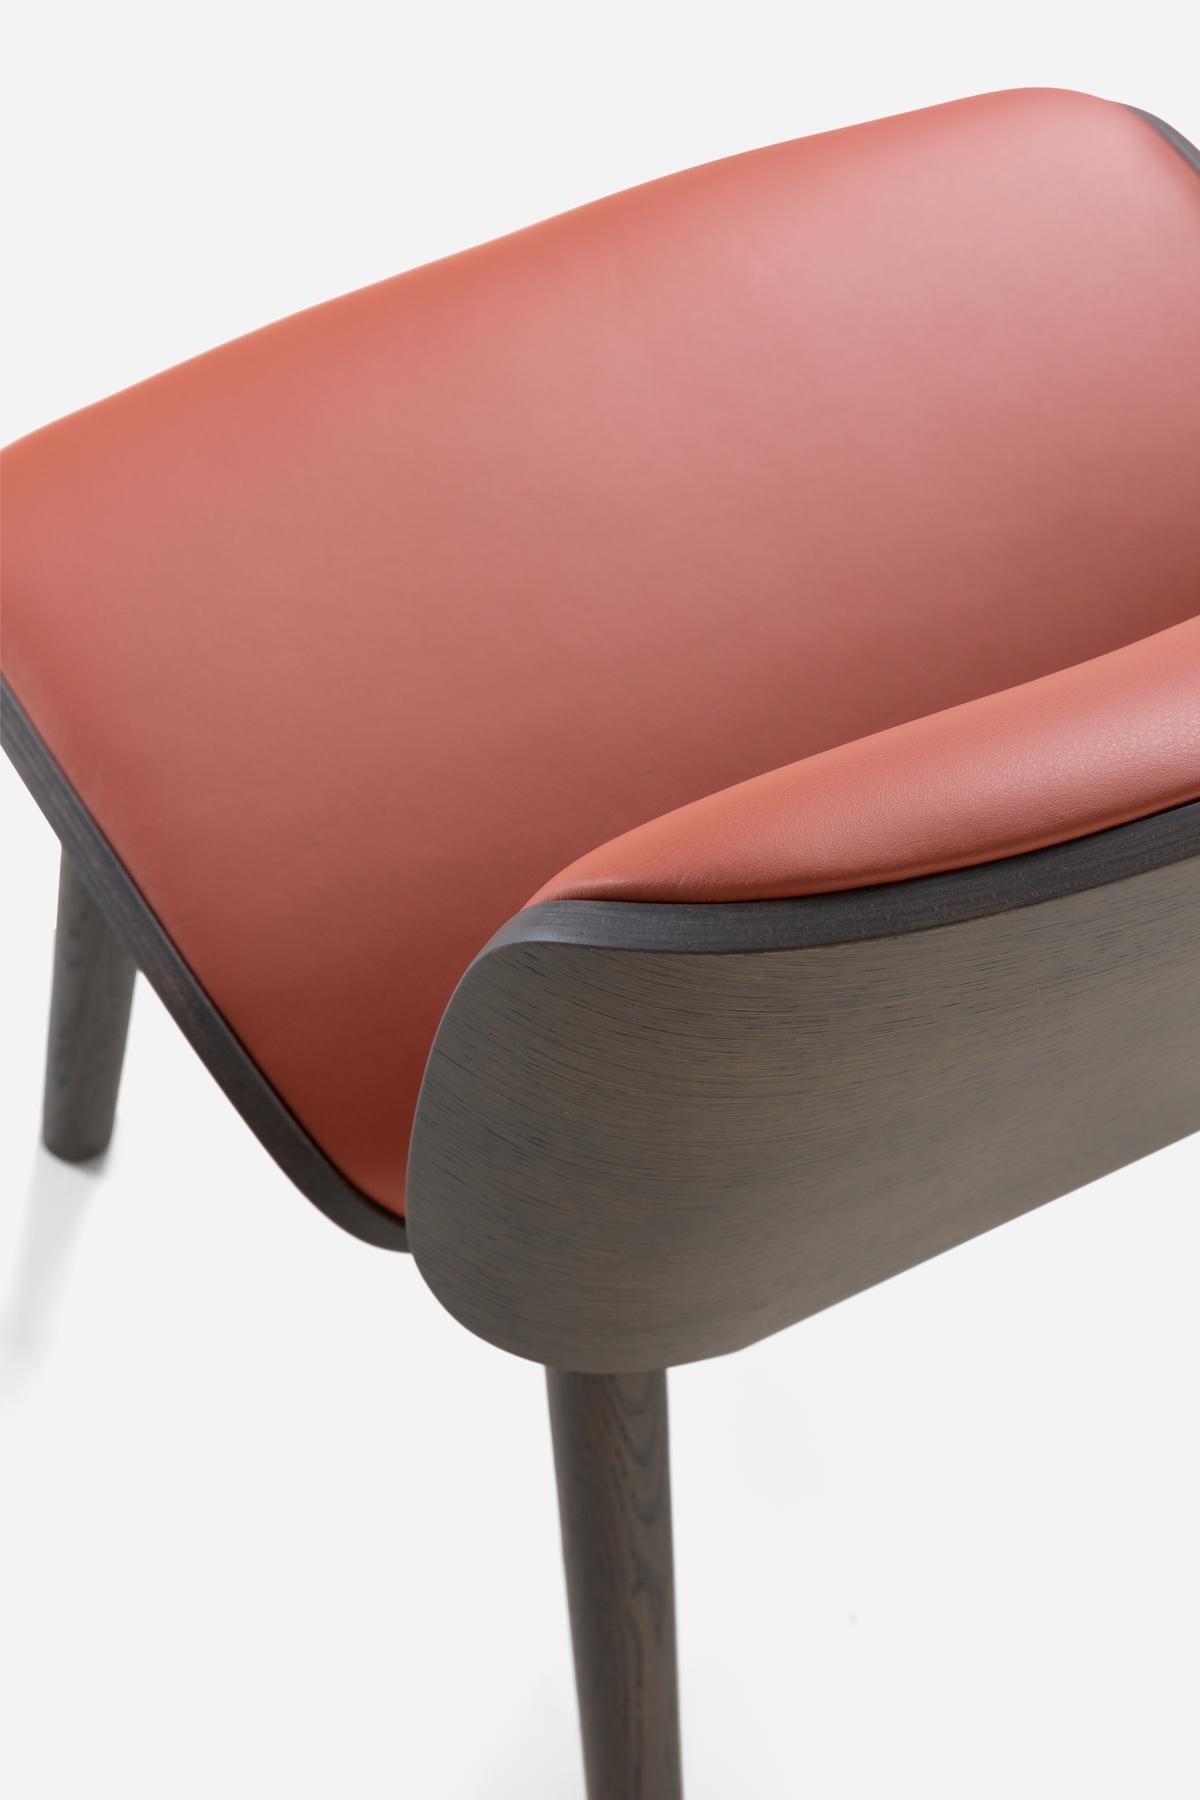 Moooi Nut Dining Chair in Grey Stained Oak & Spectrum Red Brown 30172 Upholstery In New Condition For Sale In Brooklyn, NY